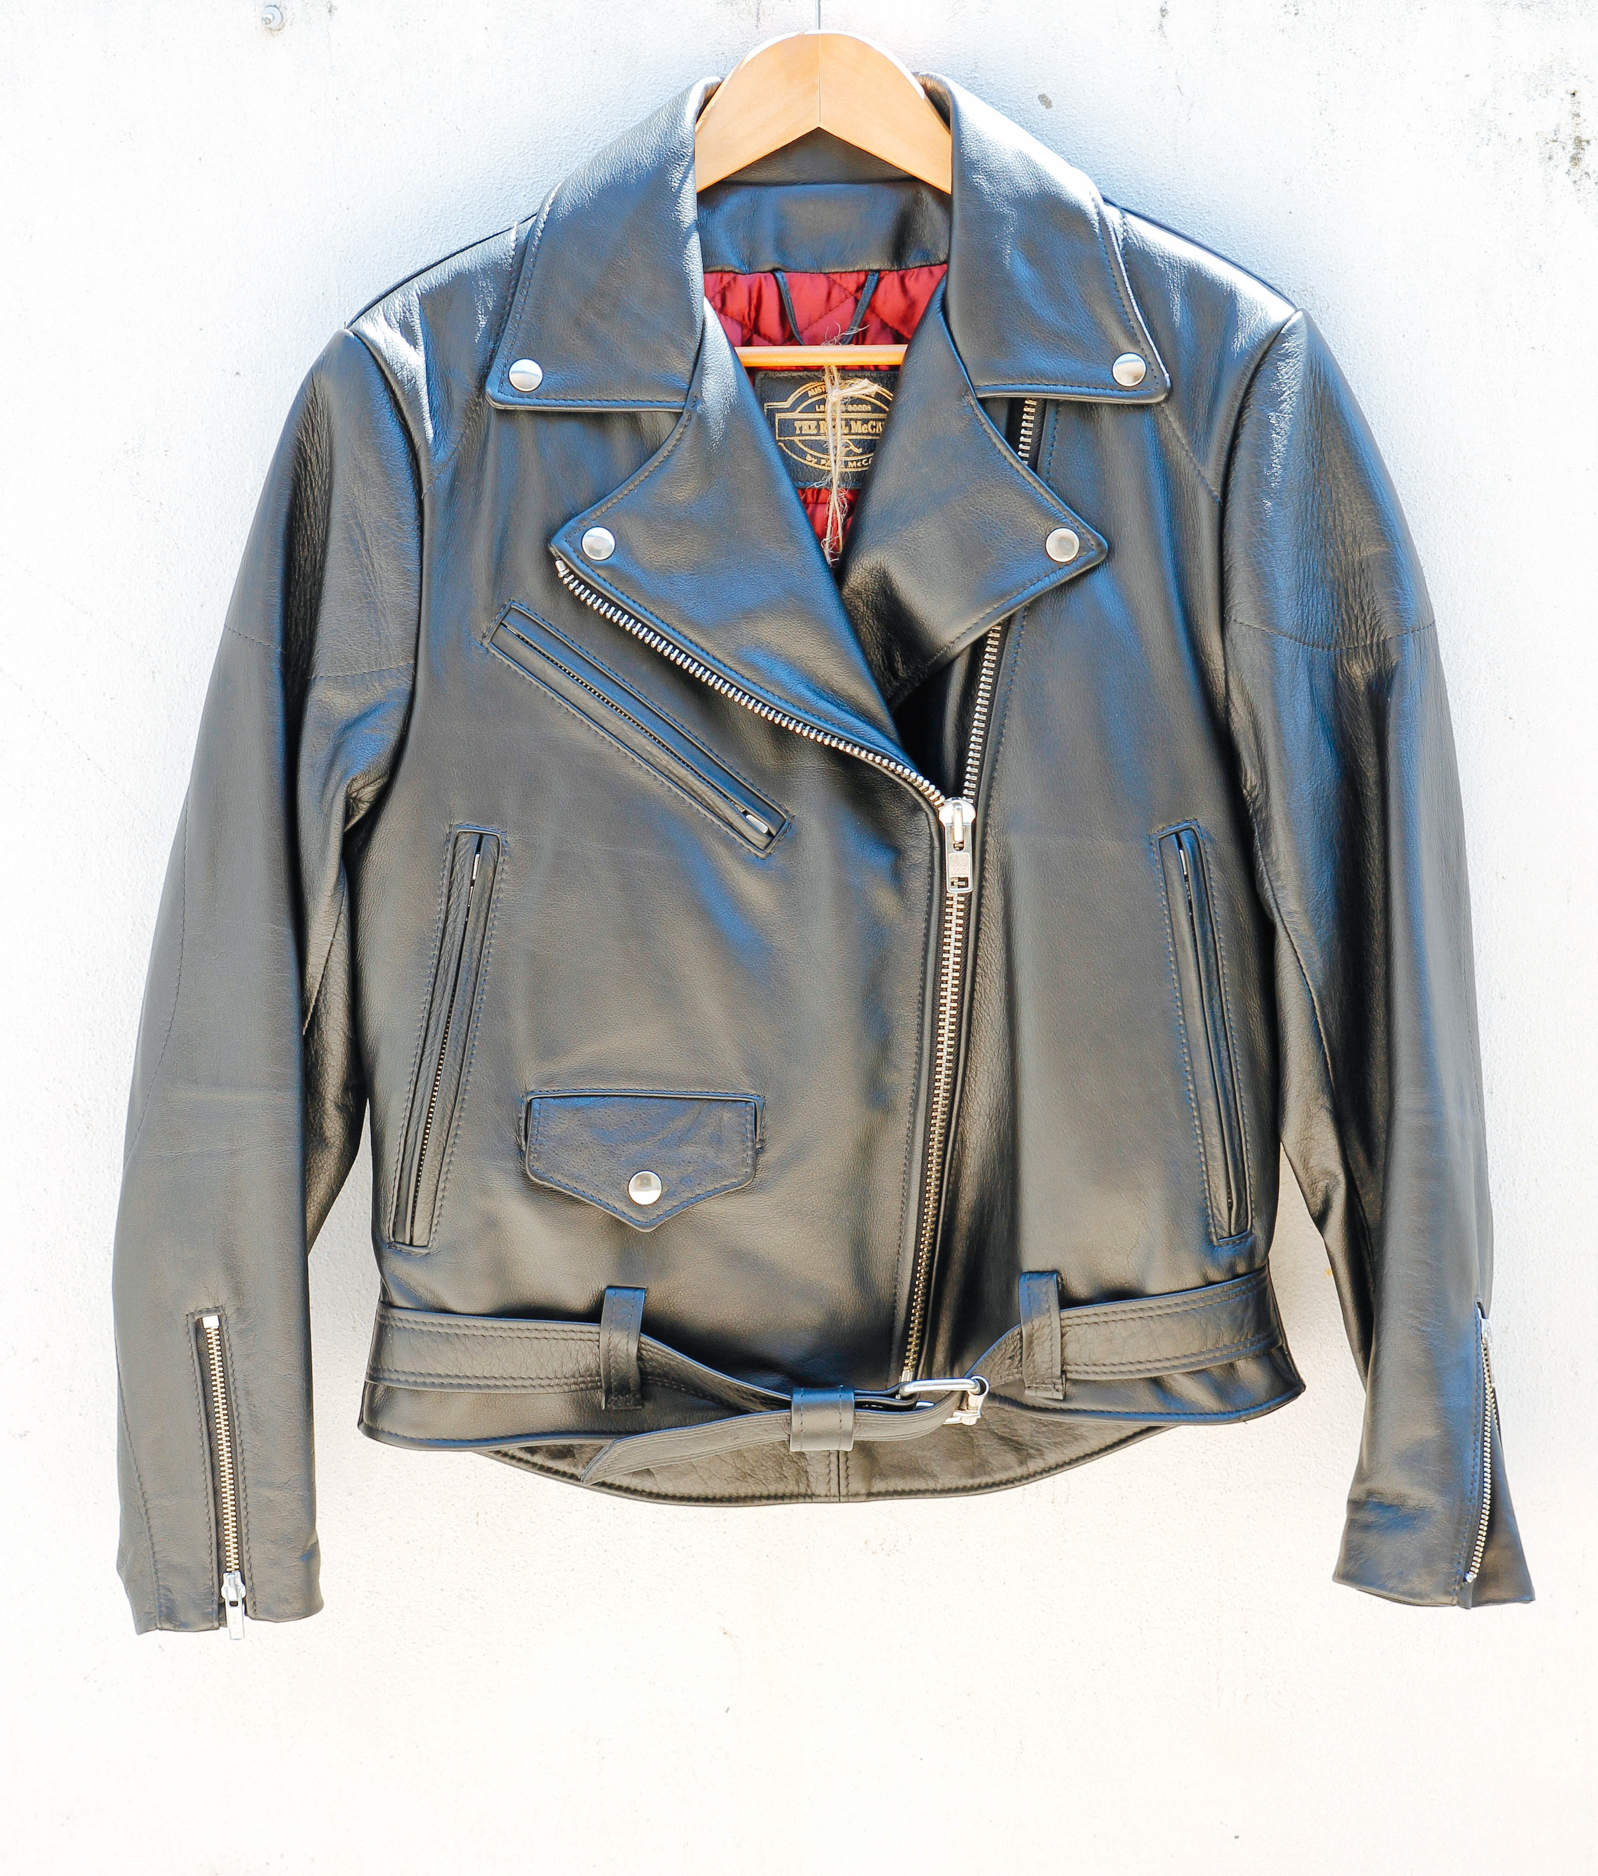 Kangaroo & Cowhide Leather Jackets and Vests - The Australian Made Campaign